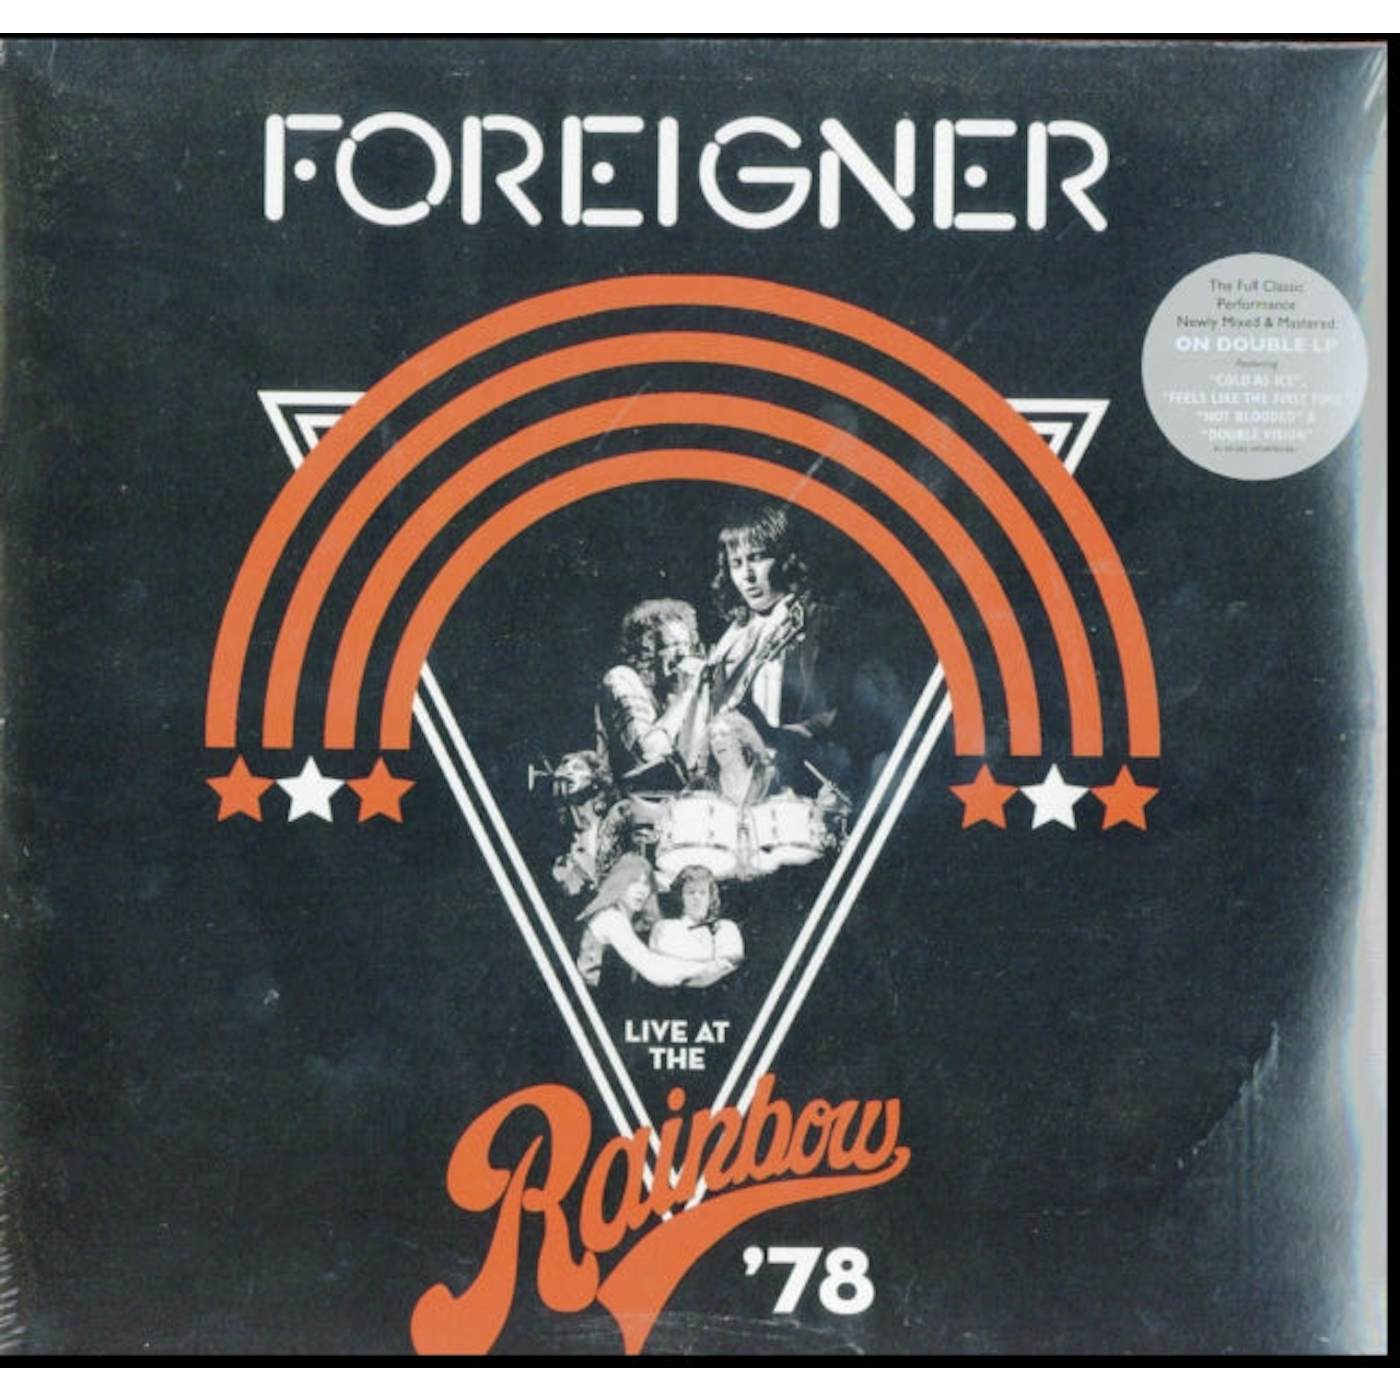 Foreigner LP Vinyl Record - Live At The Rainbow '78